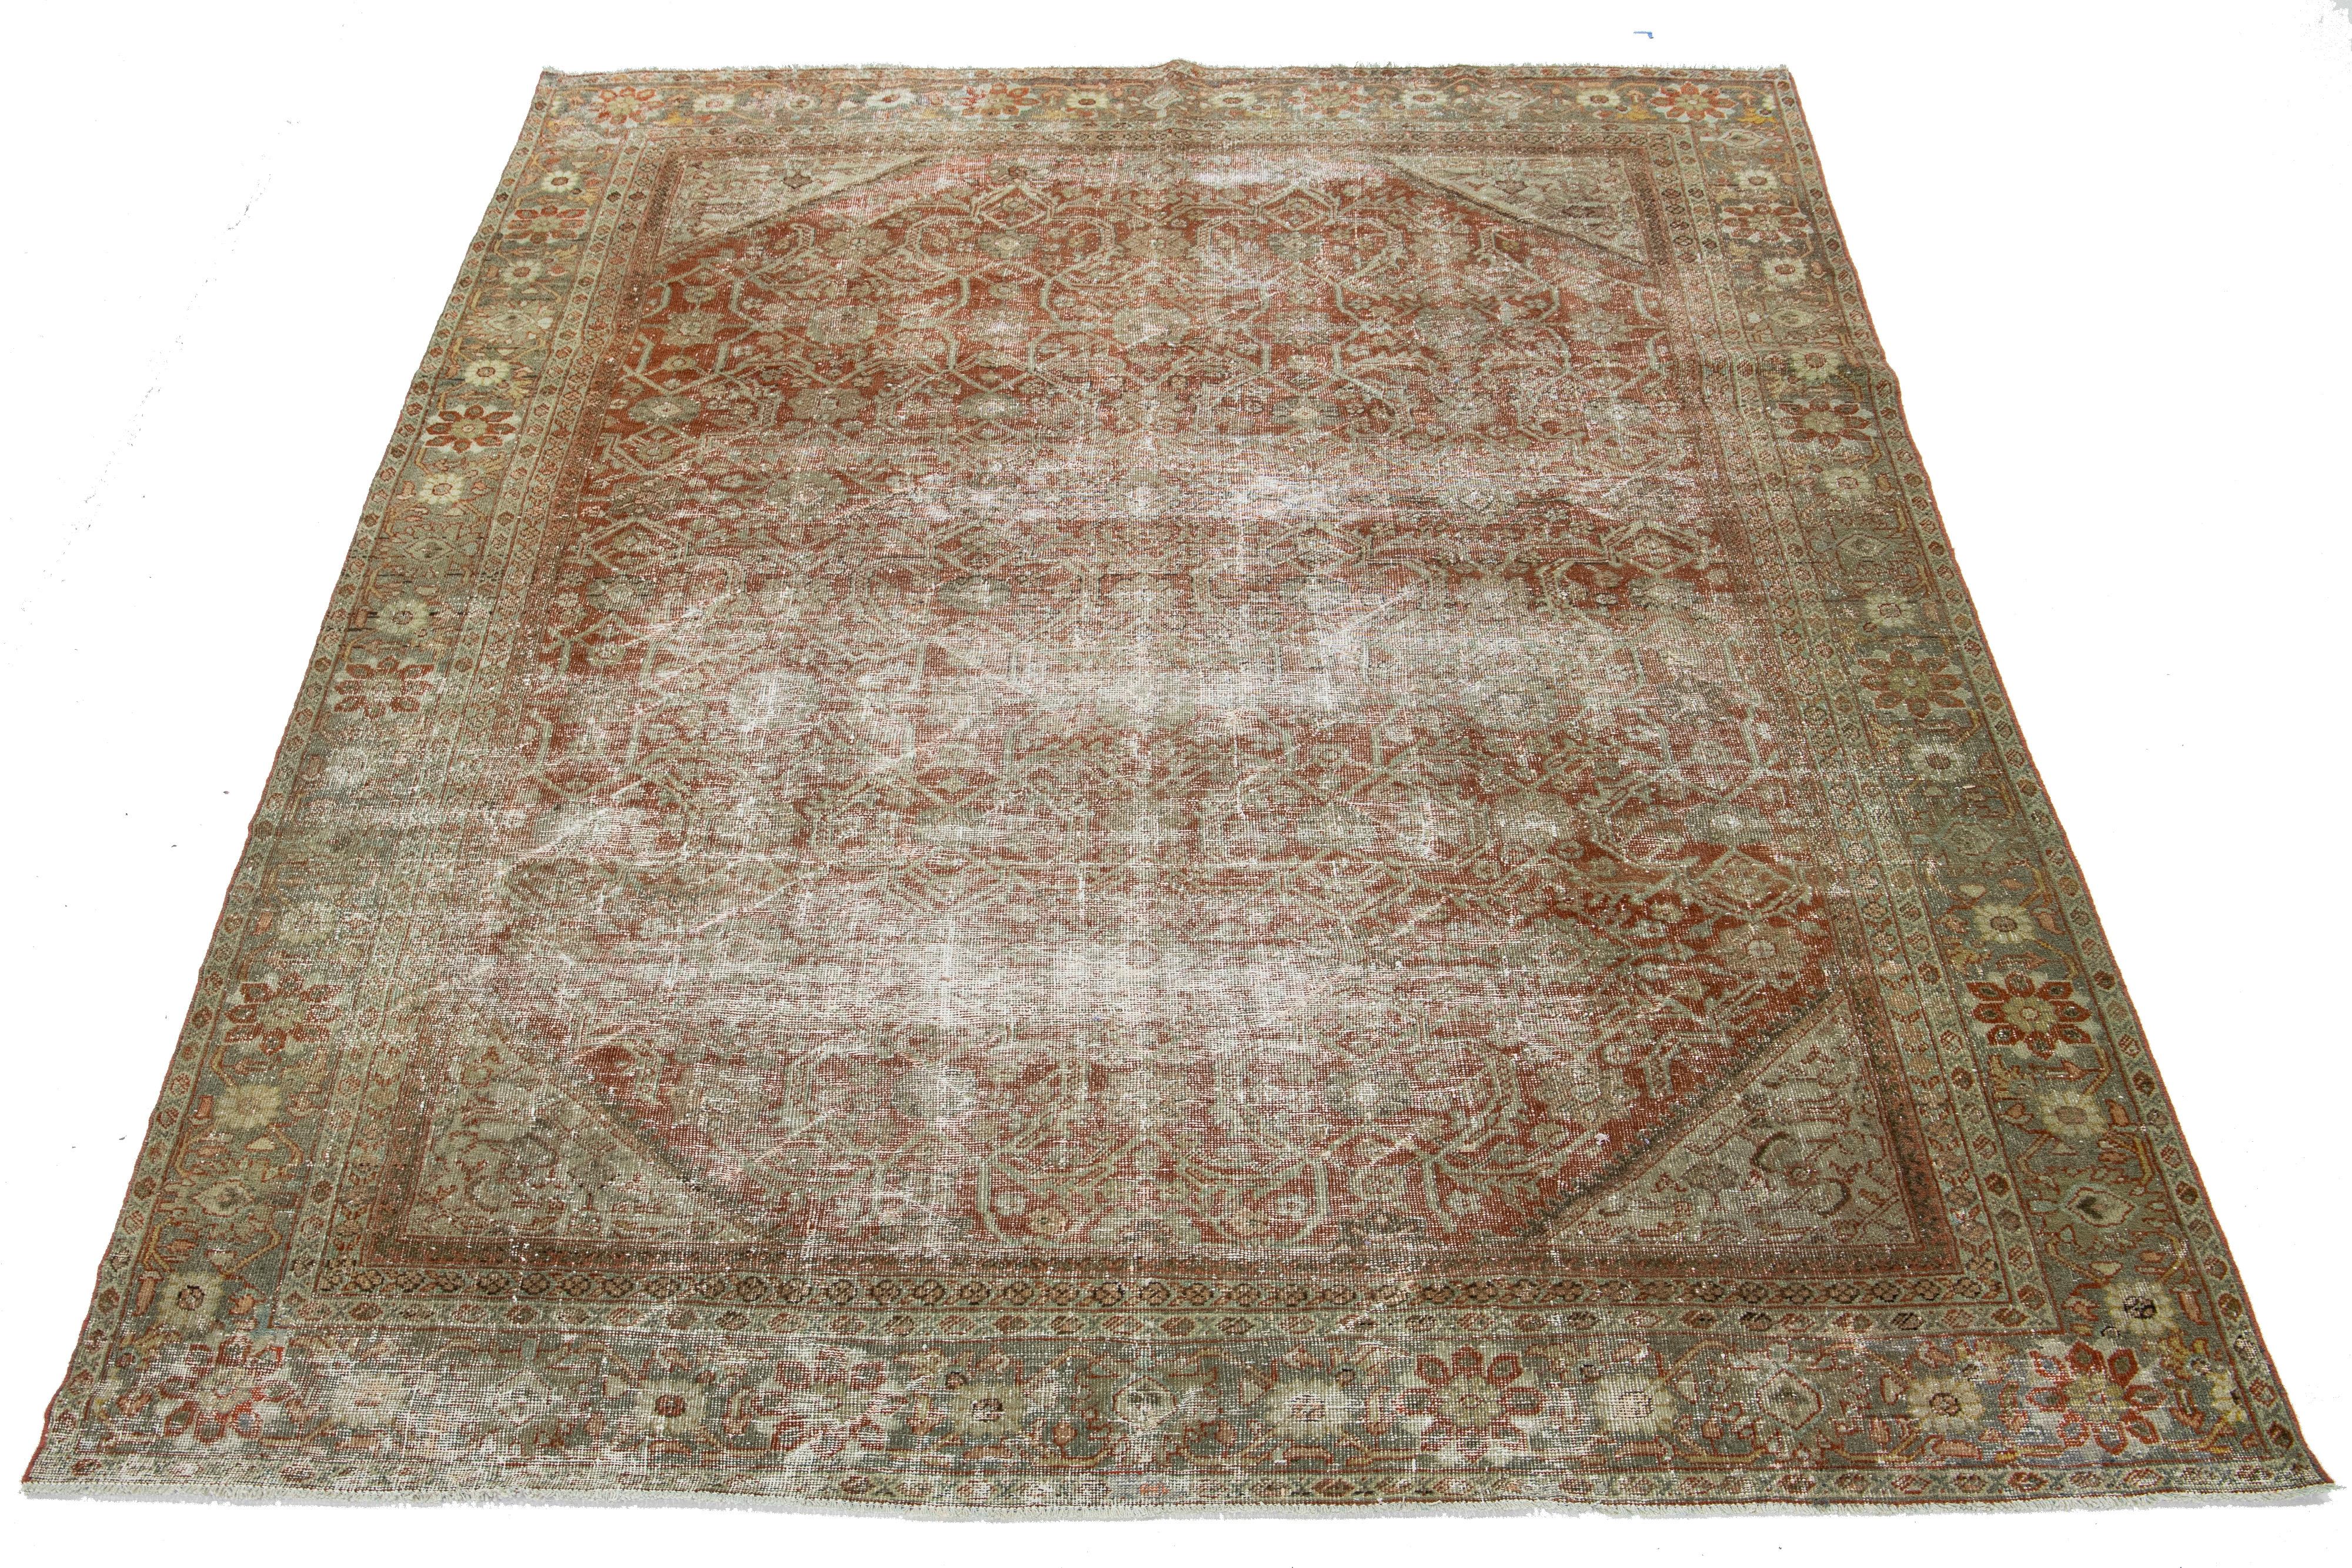 A hand-knotted wool antique Mahal rug features an all-over design with blue, brown, and beige accents on a rust color field.

This rug measures 8'2